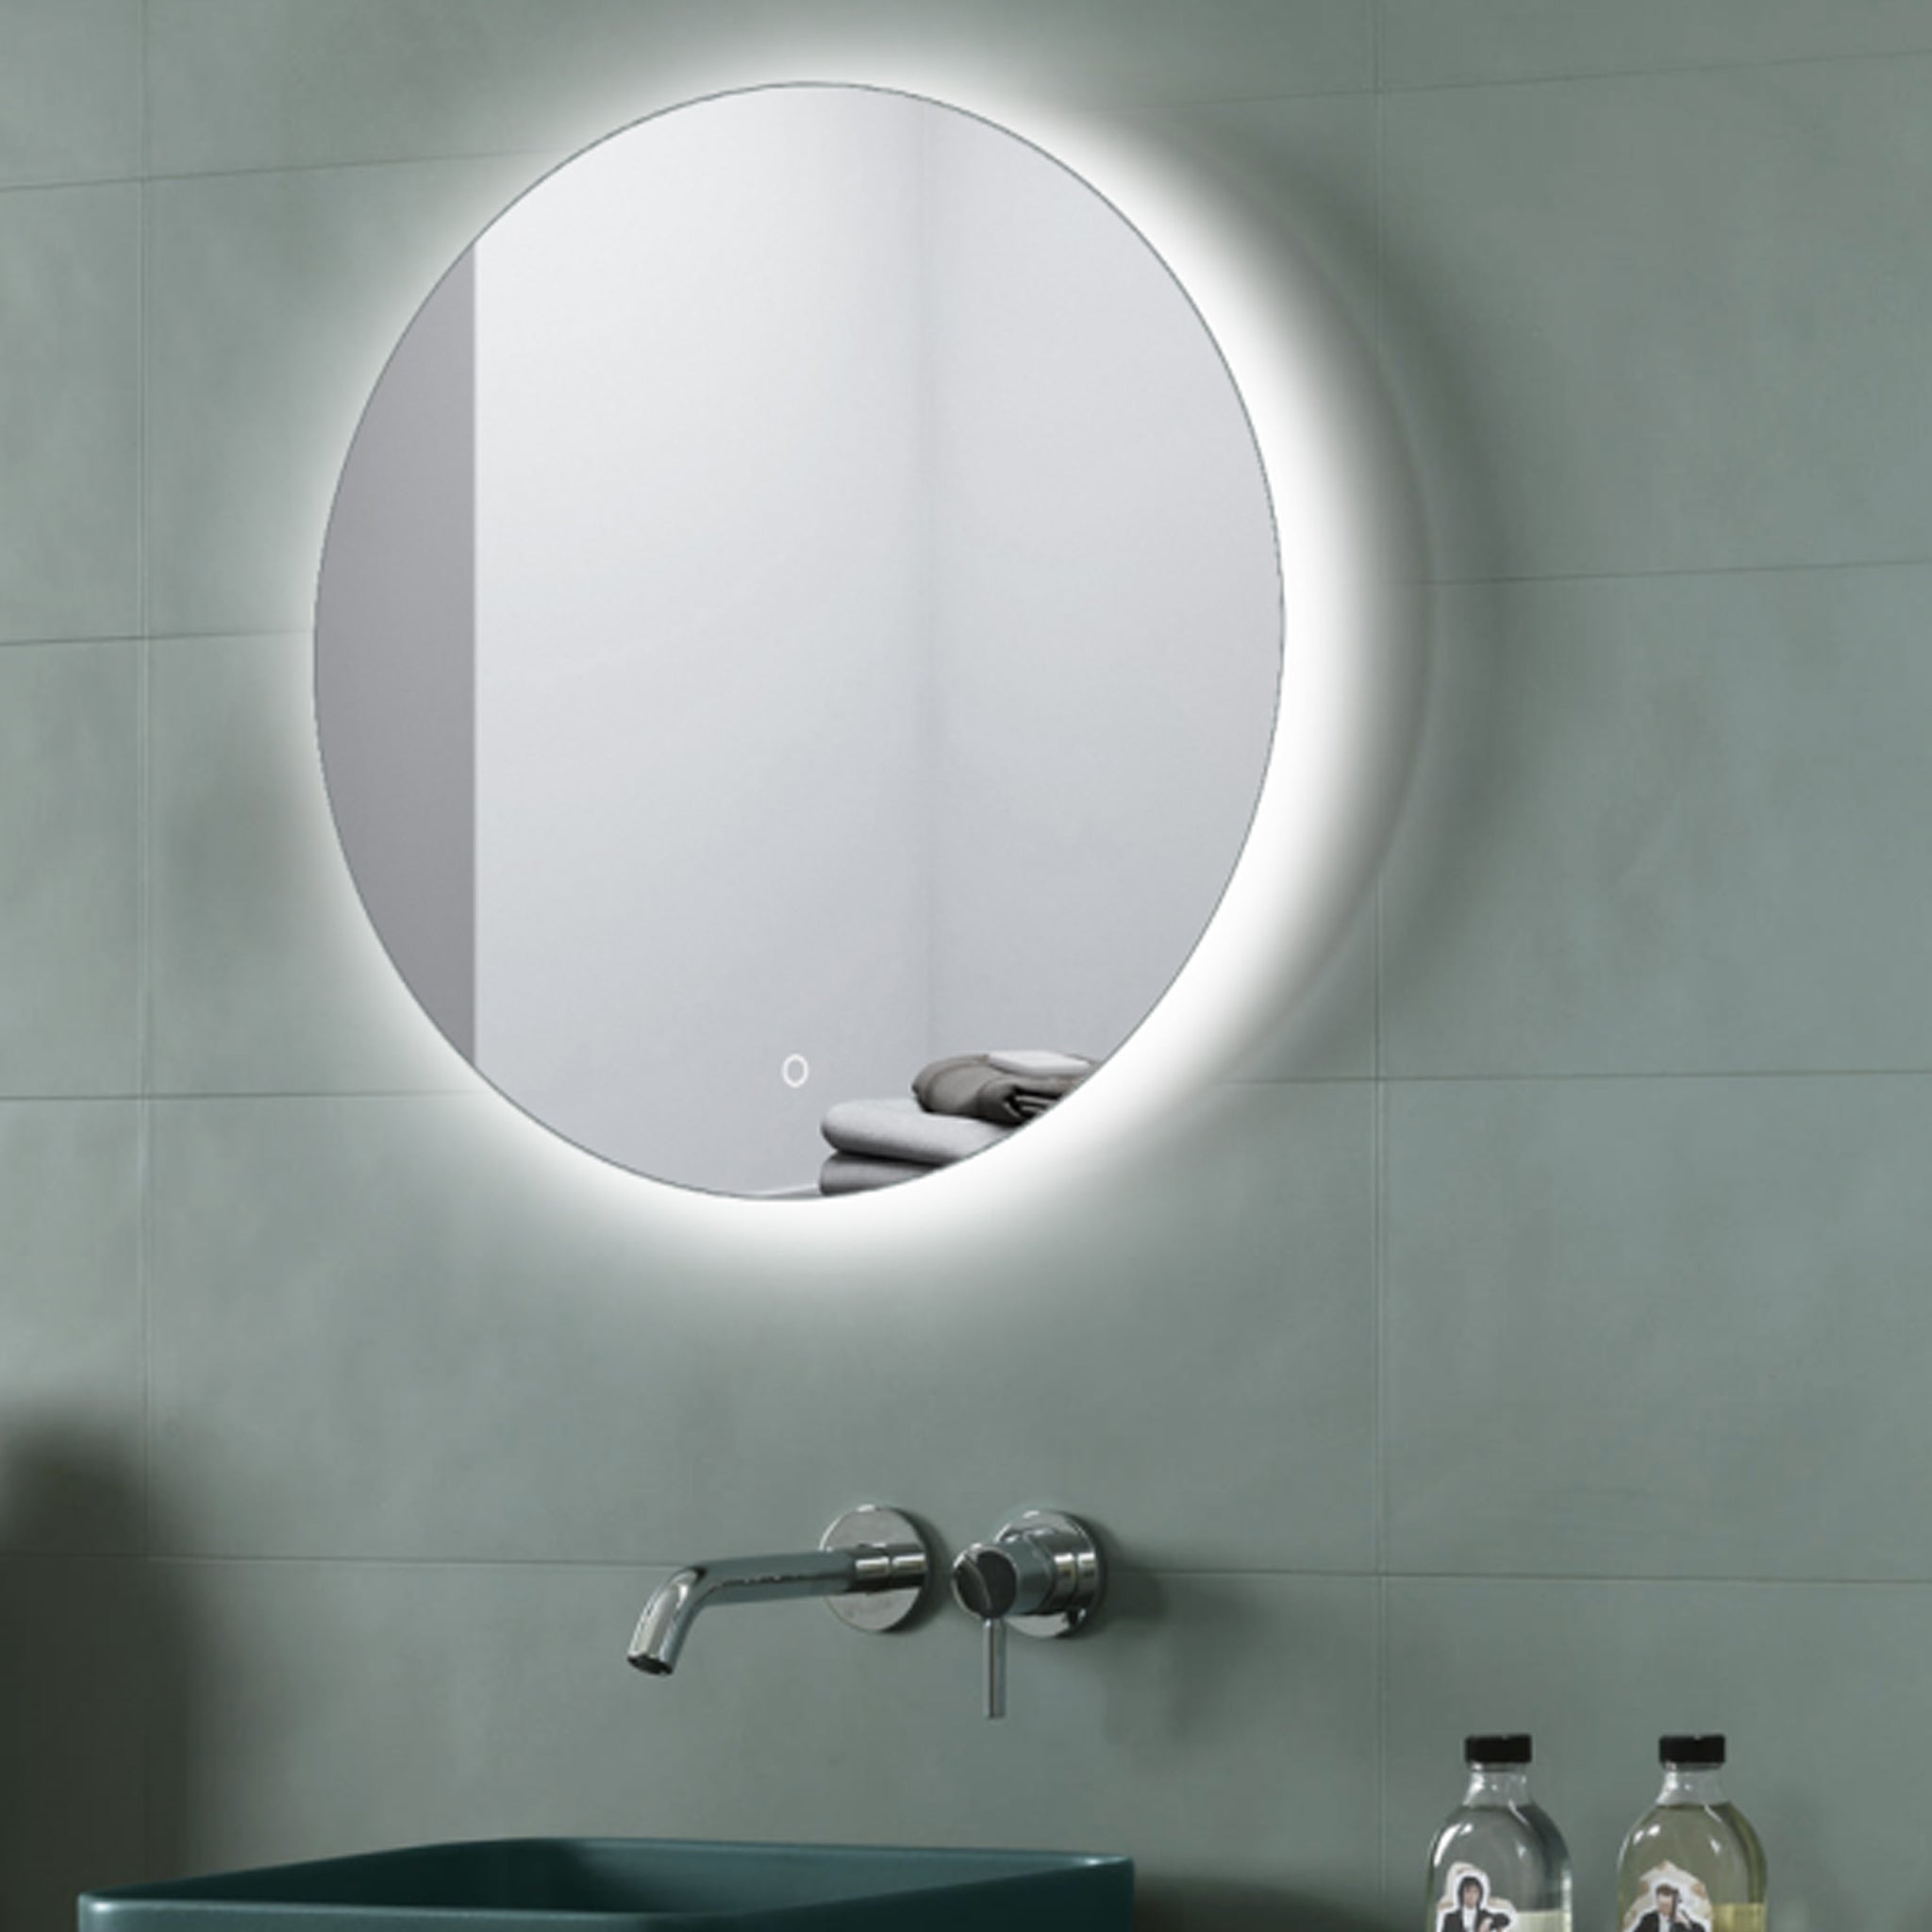 Aquamoon LED Mirror 4575 With Front Touch On/Off Botton, Round Frameless Design With Back Ilumination 31" Diameter